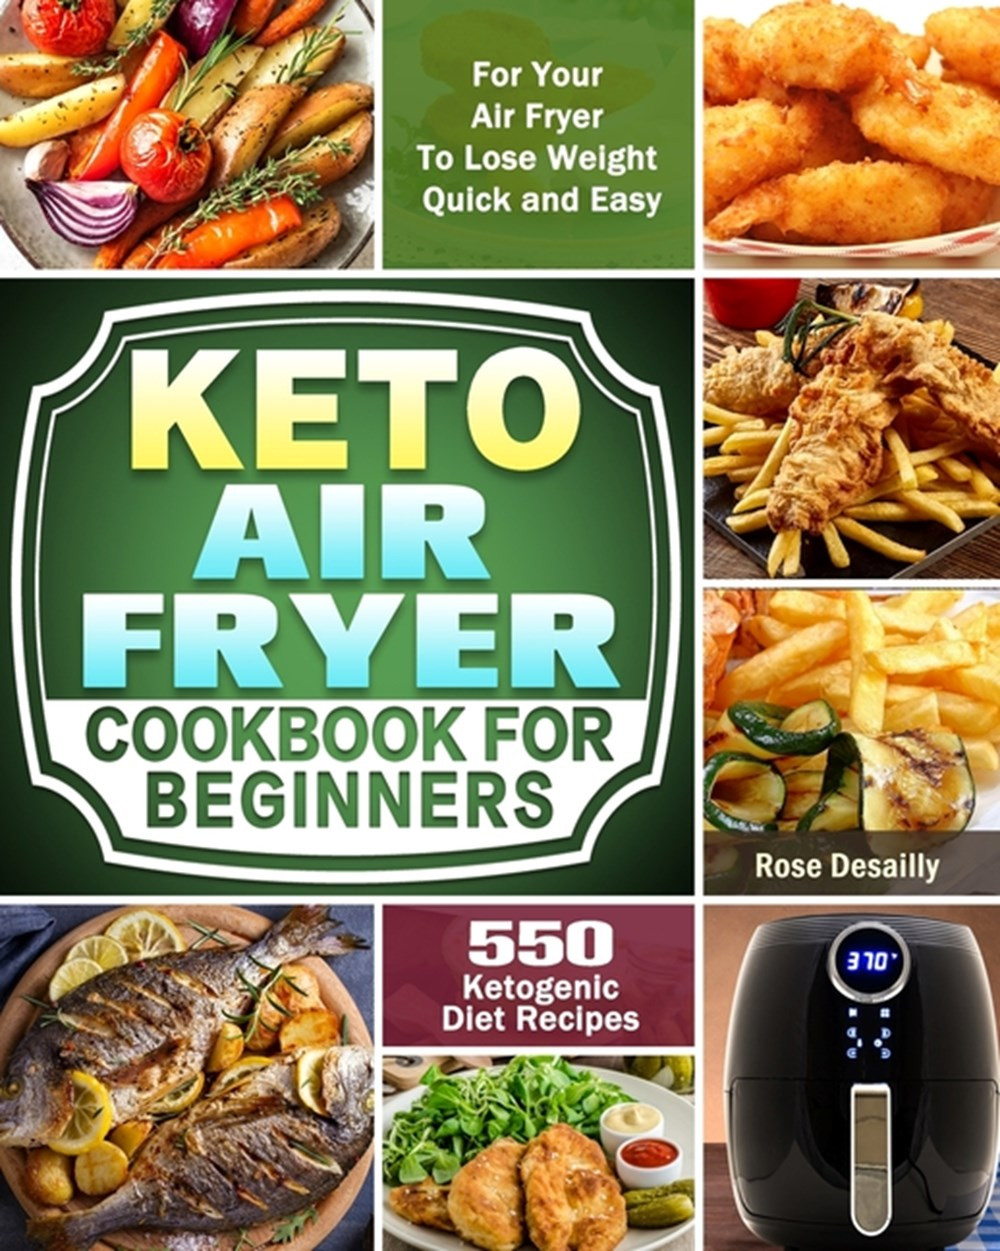 Air Fryer Weight Loss Recipes New Buy Keto Air Fryer Cookbook for Beginners 550 Ketogenic